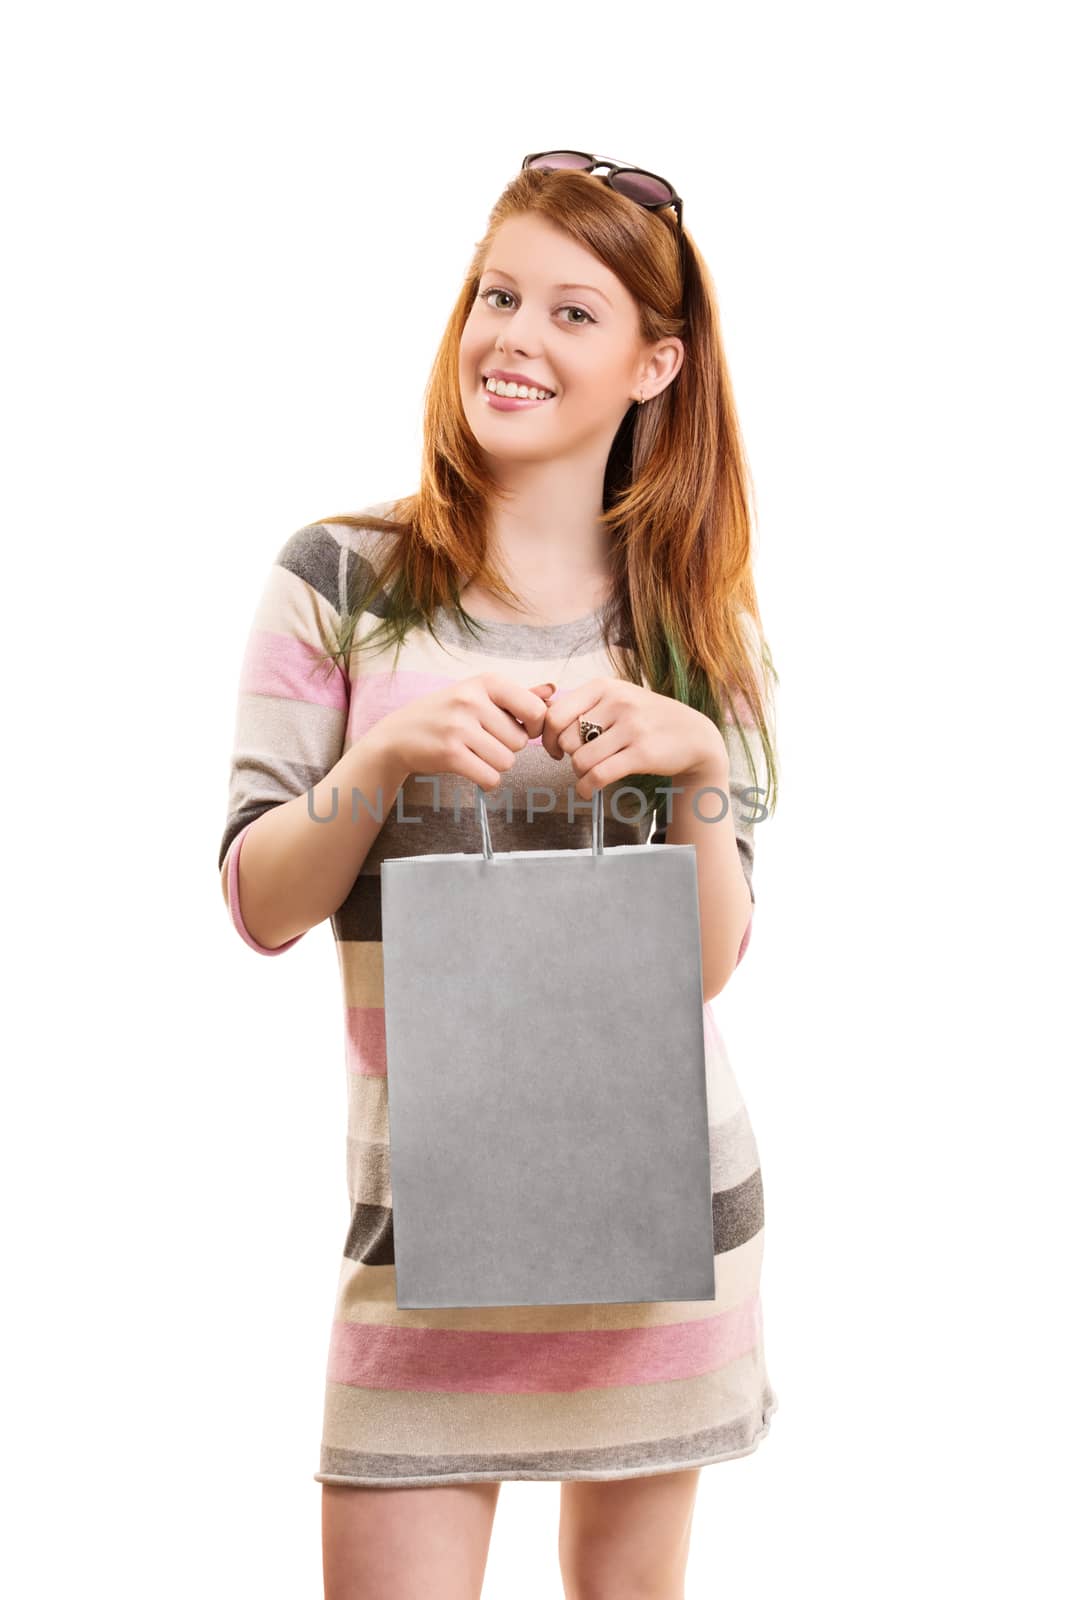 Beautiful young girl holding a shopping bag by Mendelex